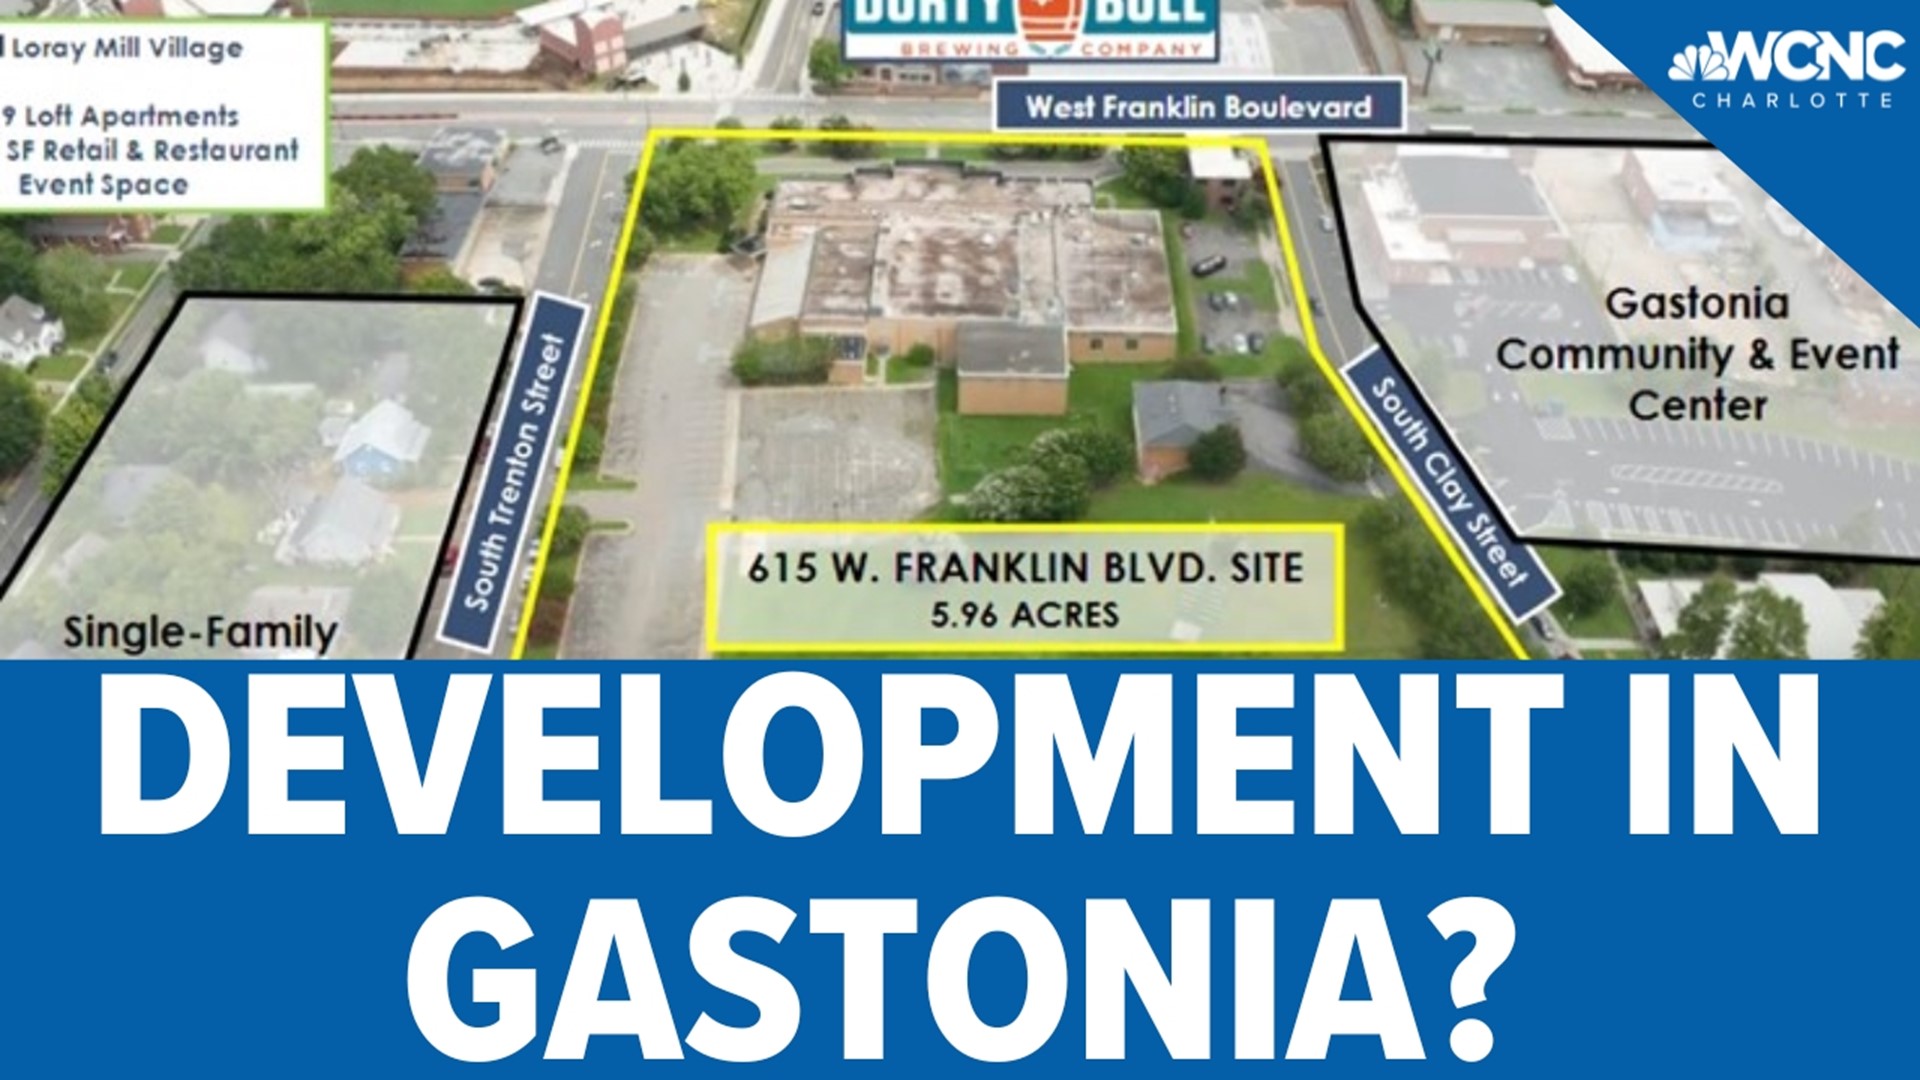 A new development could be coming to downtown Gastonia.